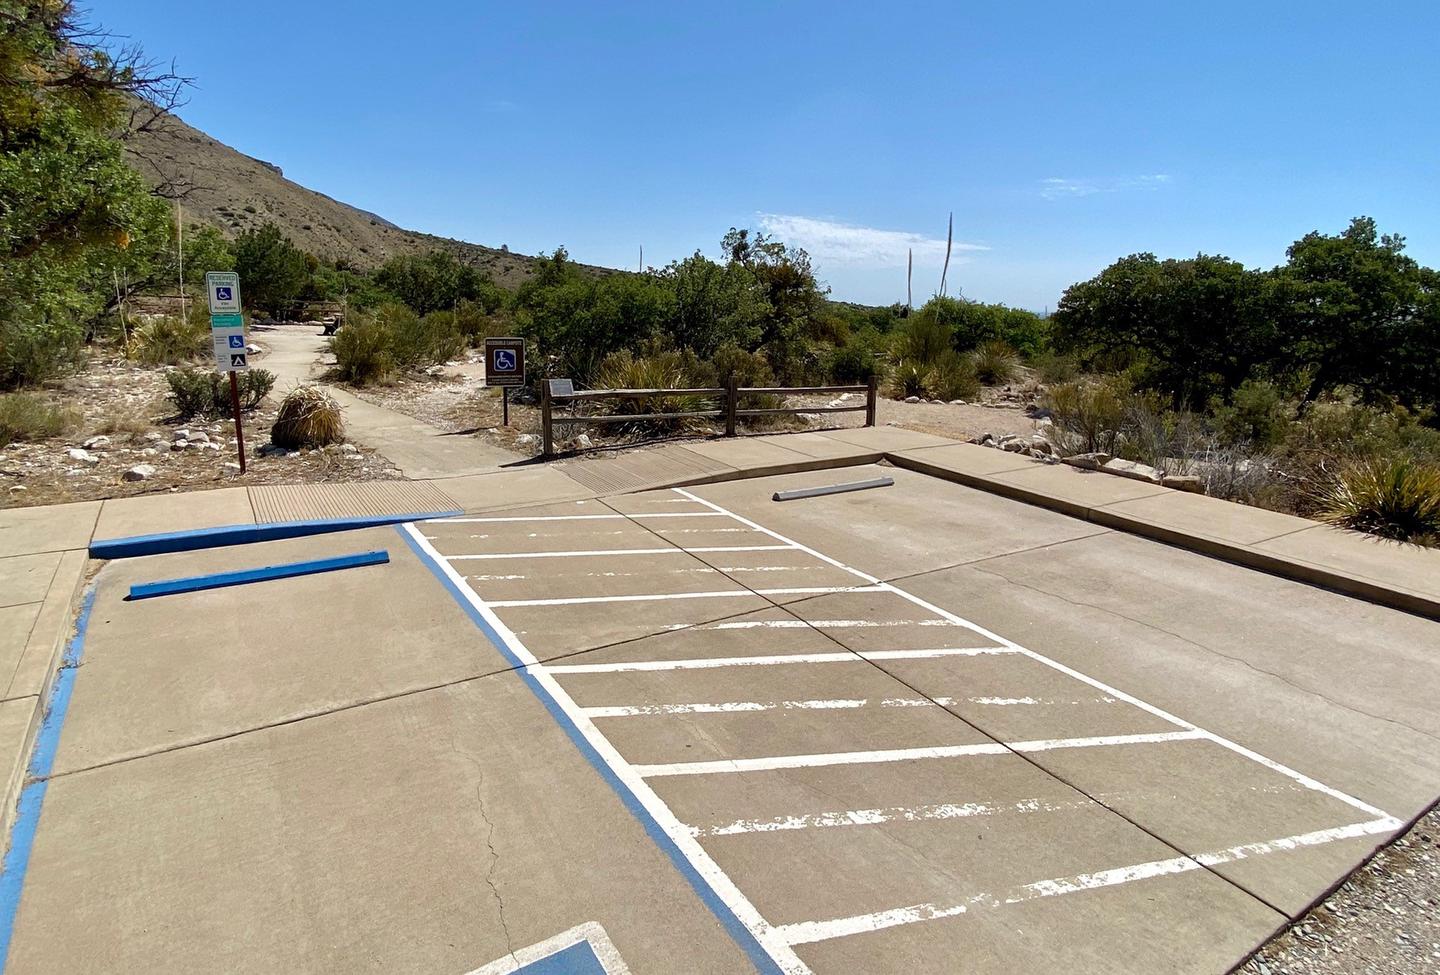 Group site #1 with parking space for accessibility needs and a paved trail leading to the picnic table and tent pad.Parking space for accessibility needs and a paved trail leading to the picnic table and tent pad.